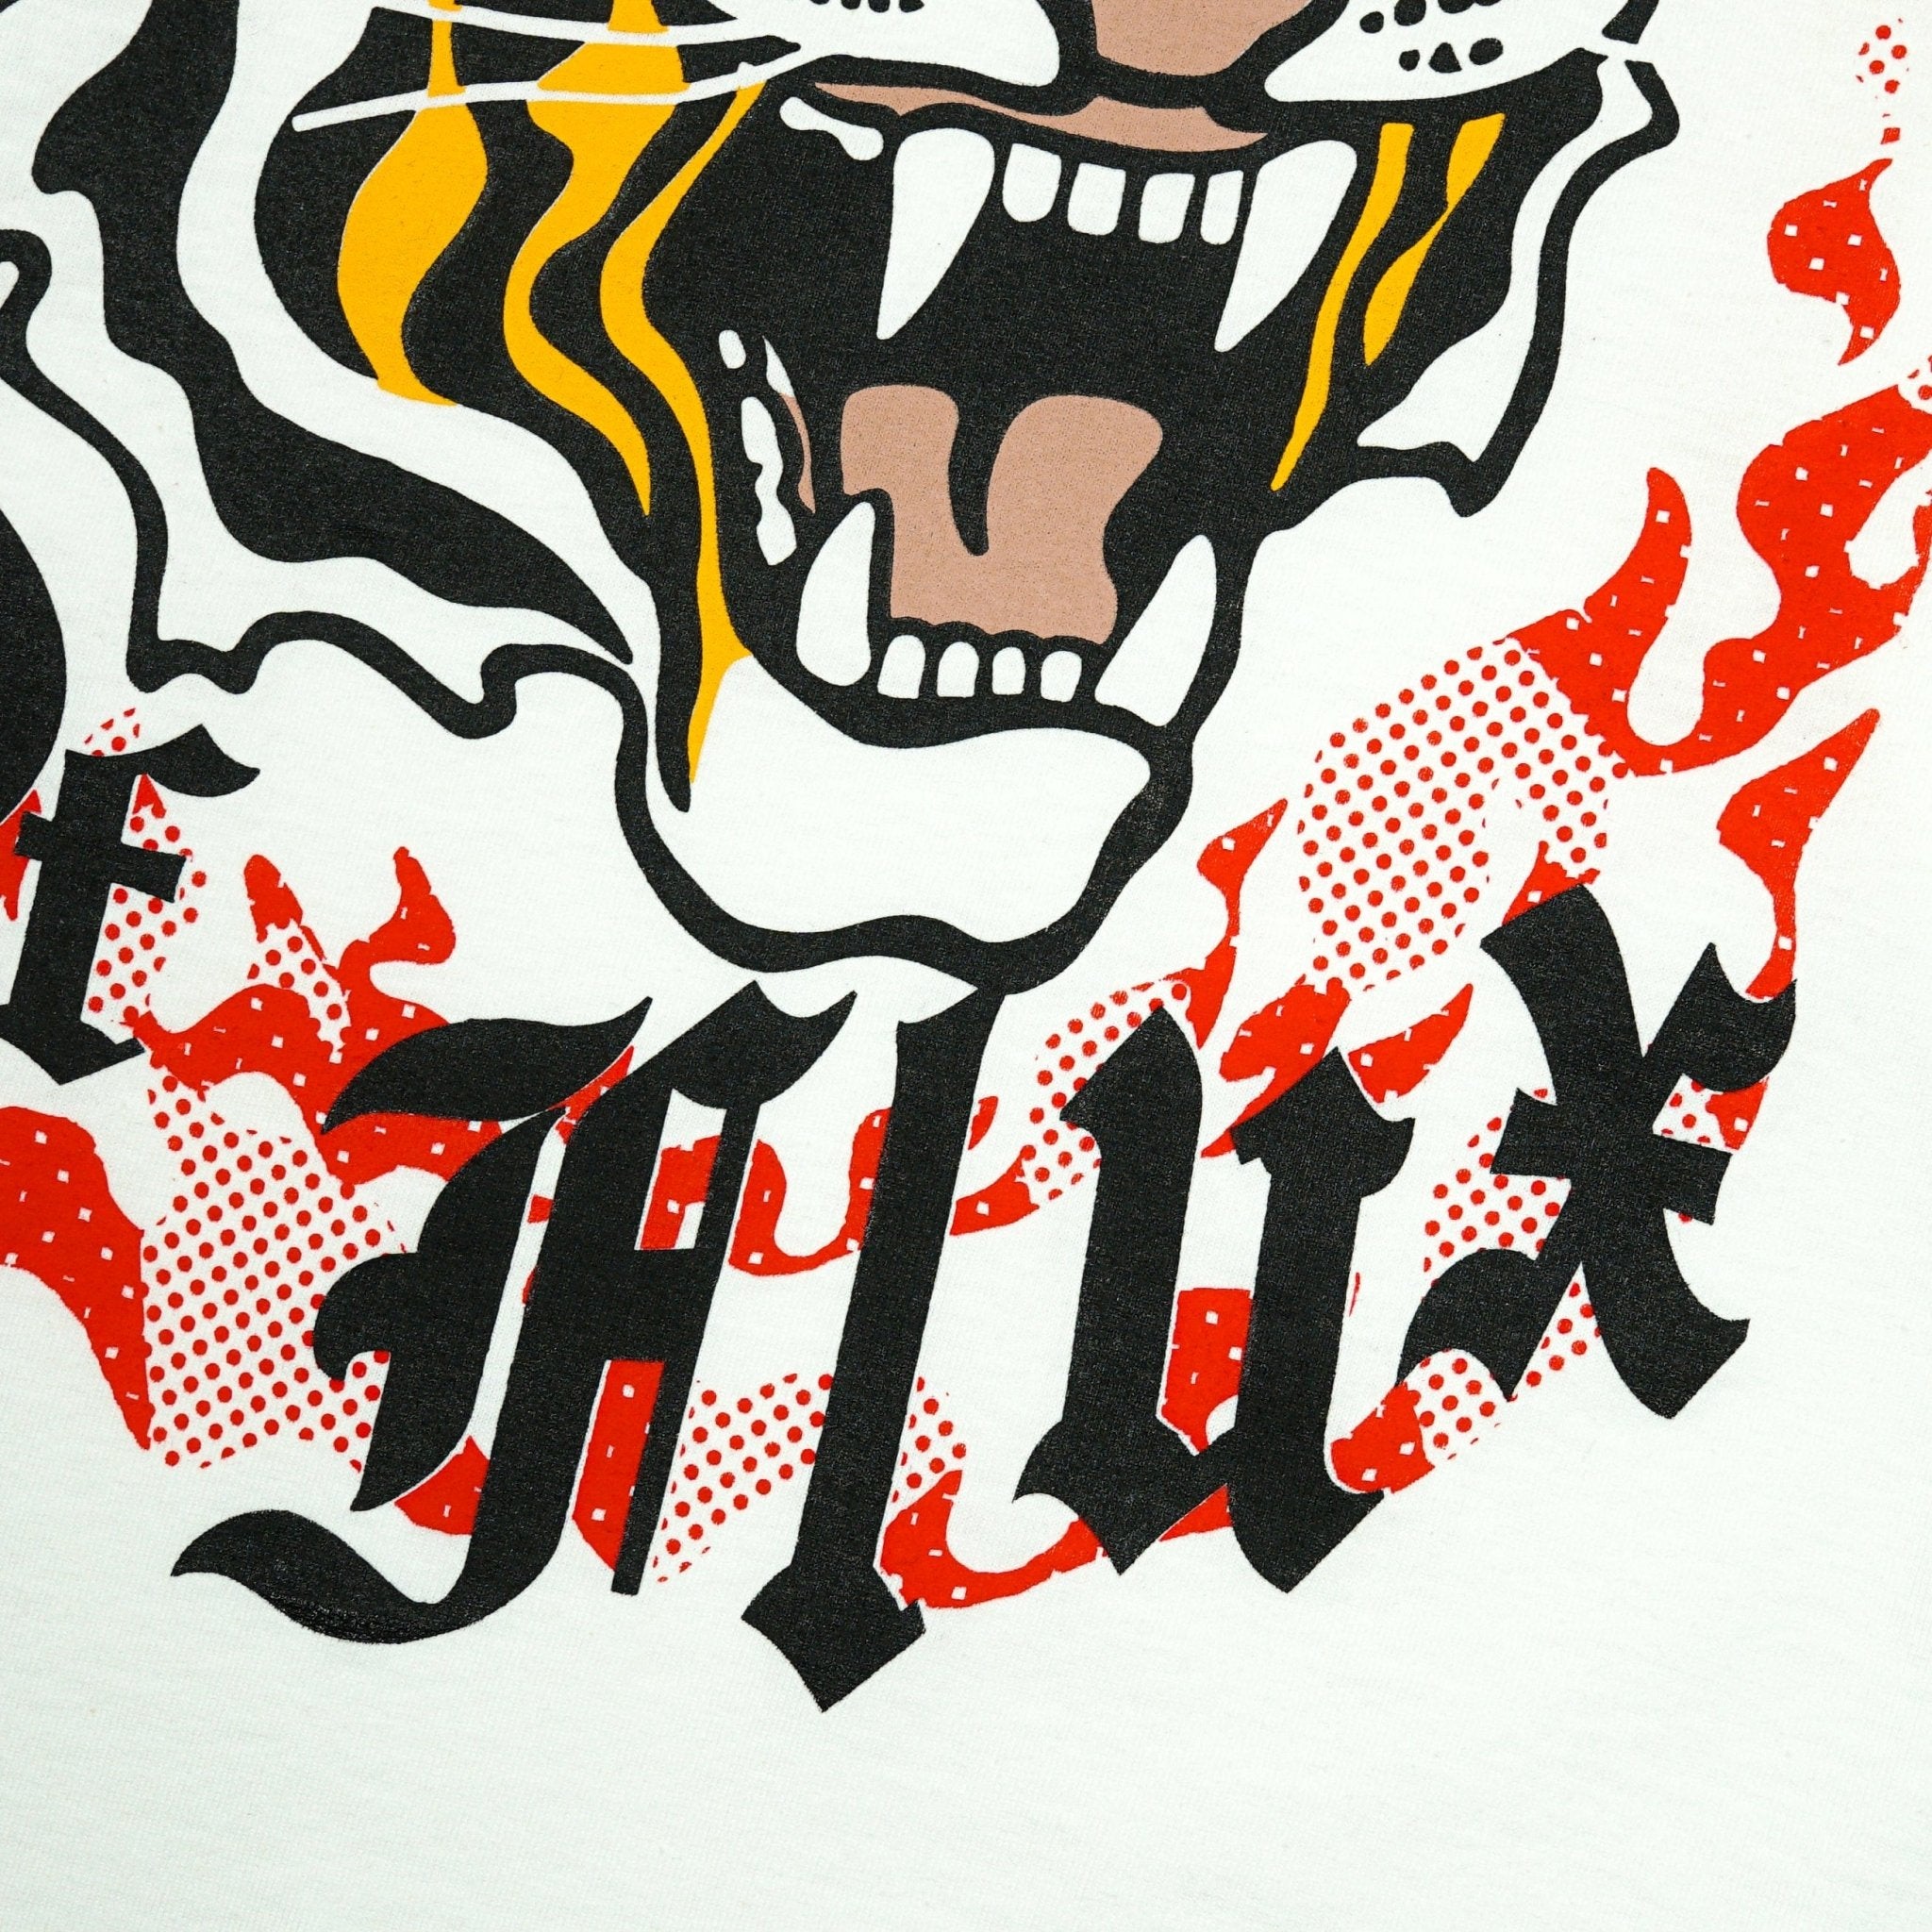 Flaming Tiger Long-sleeve Tee in white - State Of Flux - State Of Flux